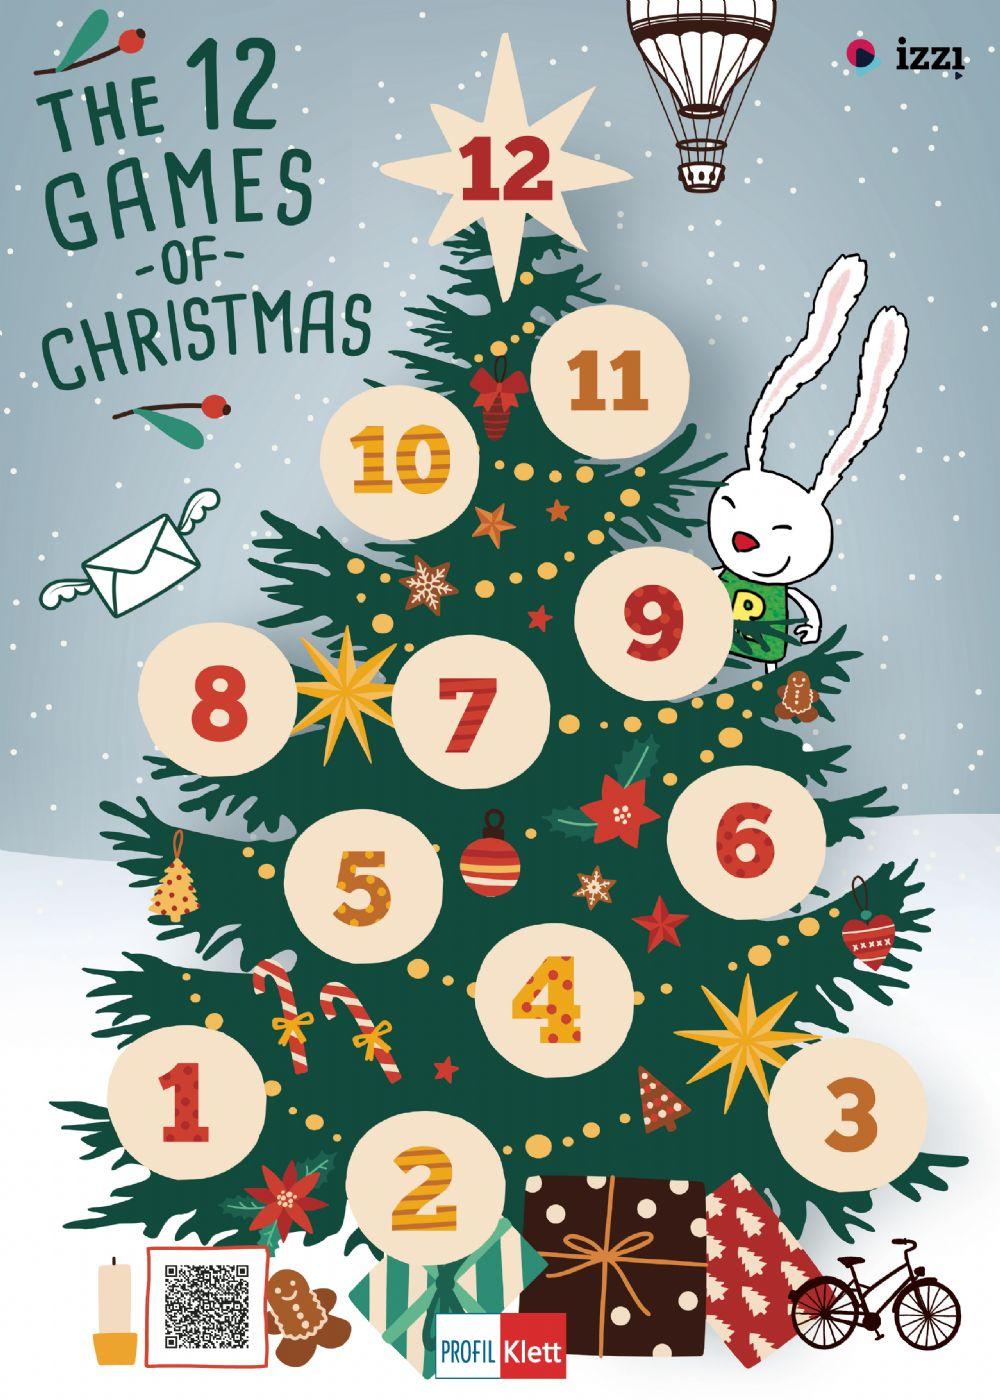 The 12 games of christmas